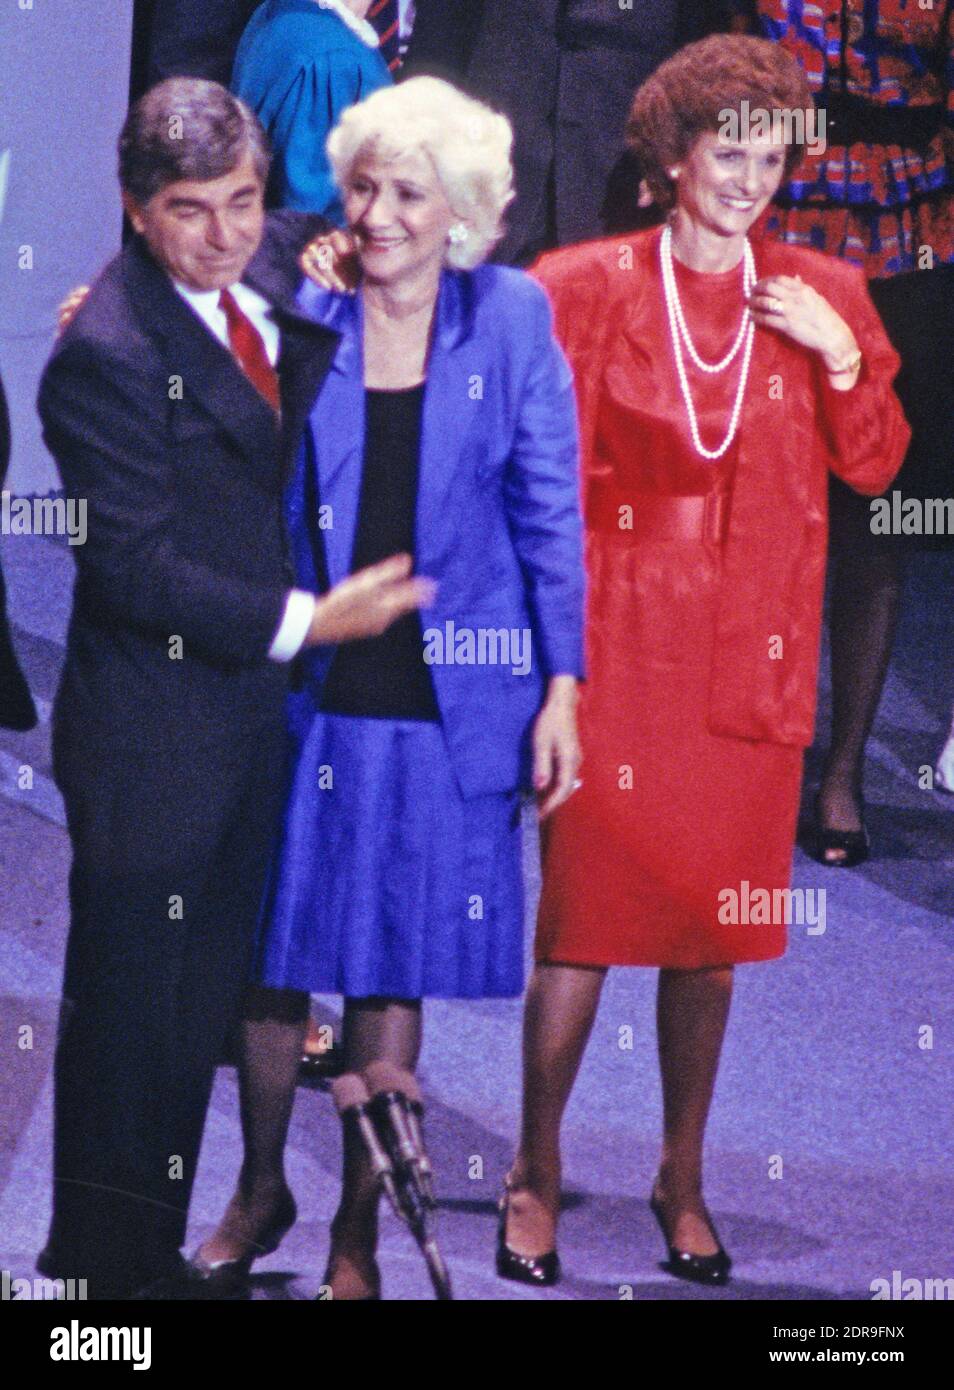 Oscar Award-winning actress Olympia Dukakis, appears with her cousin, Governor Michael Dukakis (Democrat of Massachusetts), the 1988 Democratic Party nominee for President of the United States, at the 1988 Democratic National Convention in the Omni Coliseum in Atlanta, Georgia on July 21, 1988. Kitty Dukakis is a right in the red dress. Photo by Arnie Sachs/CNP/ABACAPRESS.COM Stock Photo